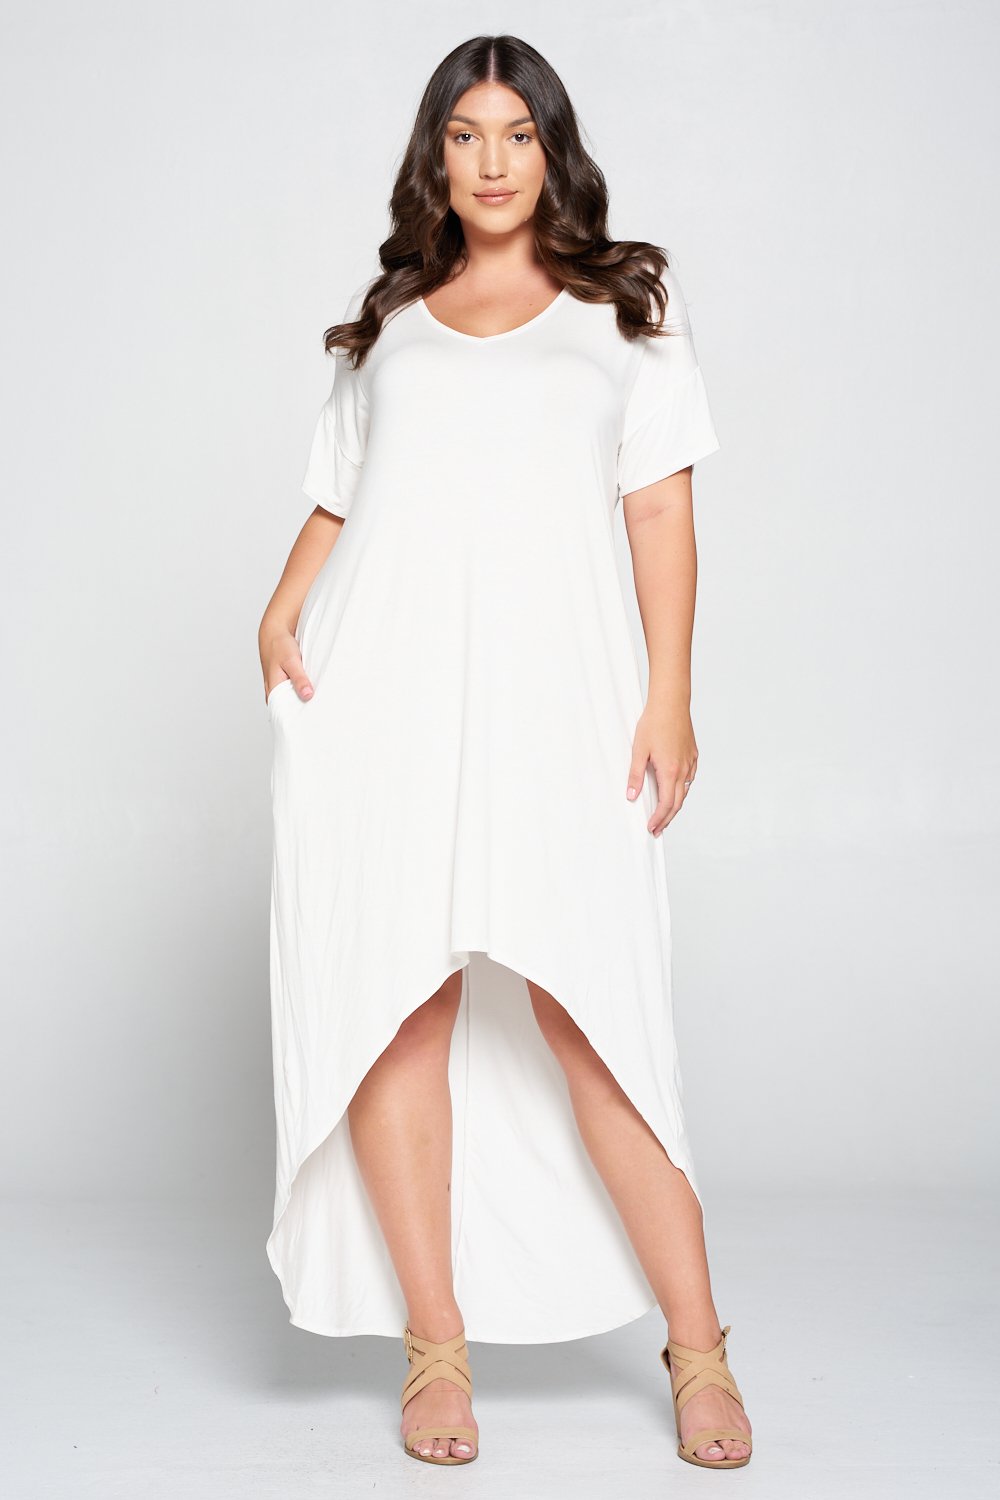 livd L I V D women's contemporary plus size clothing high low hi lo dress with pockets v neck sleeves in white ivory